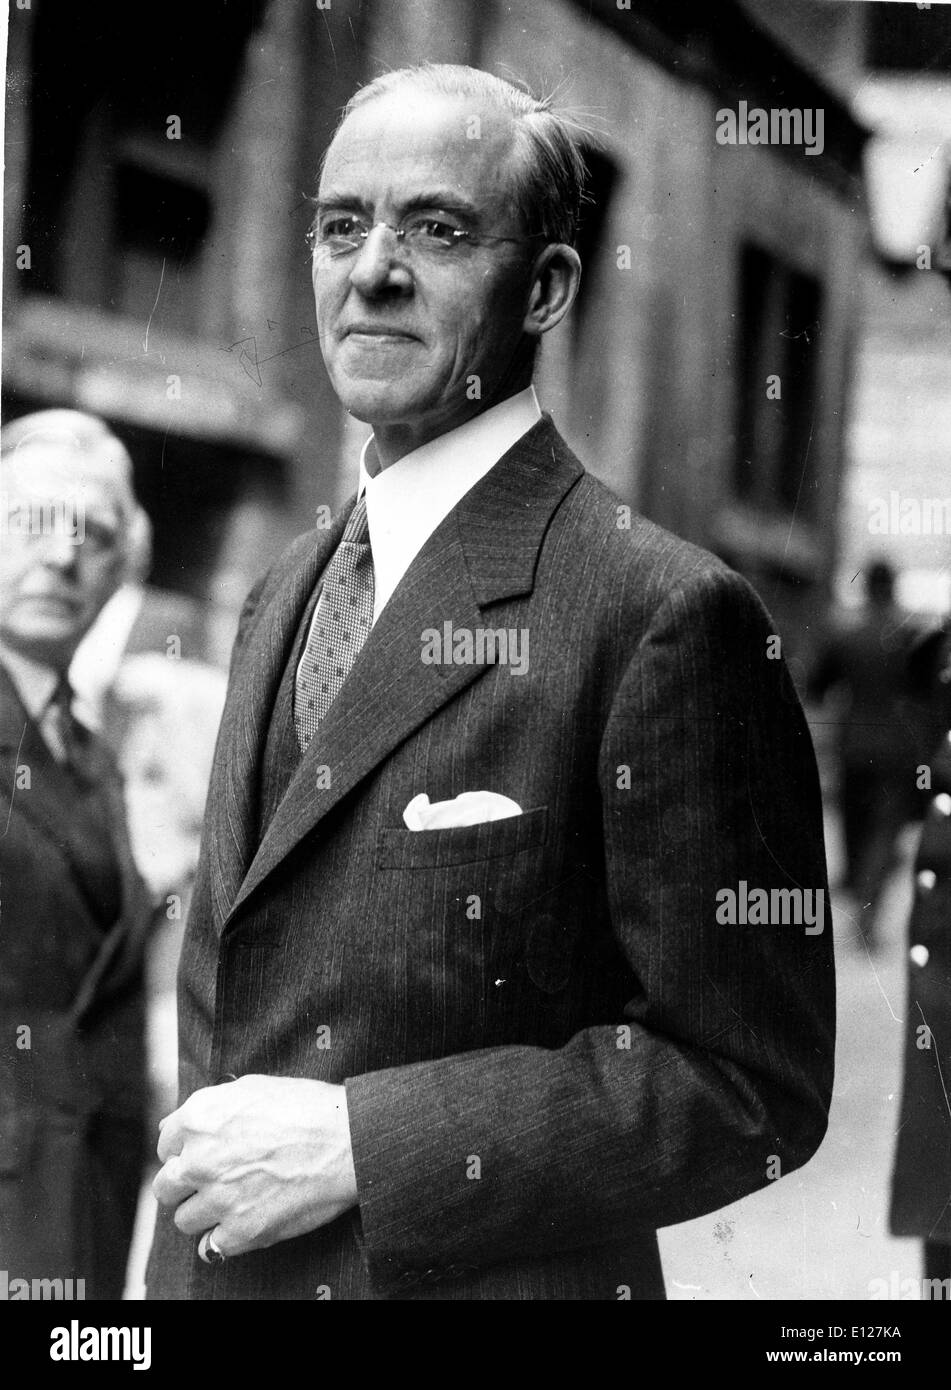 Apr 01, 2009 - London, England, United Kingdom - STAFFORD CRIPPS. Sir Richard Stafford Cripps (24 April 1889 Ð 21 April 1952) was a British Labour politician and Chancellor of the Exchequer from November 1947 to October 1950. (Credit Image: KEYSTONE Pictures USA/ZUMAPRESS.com) Stock Photo